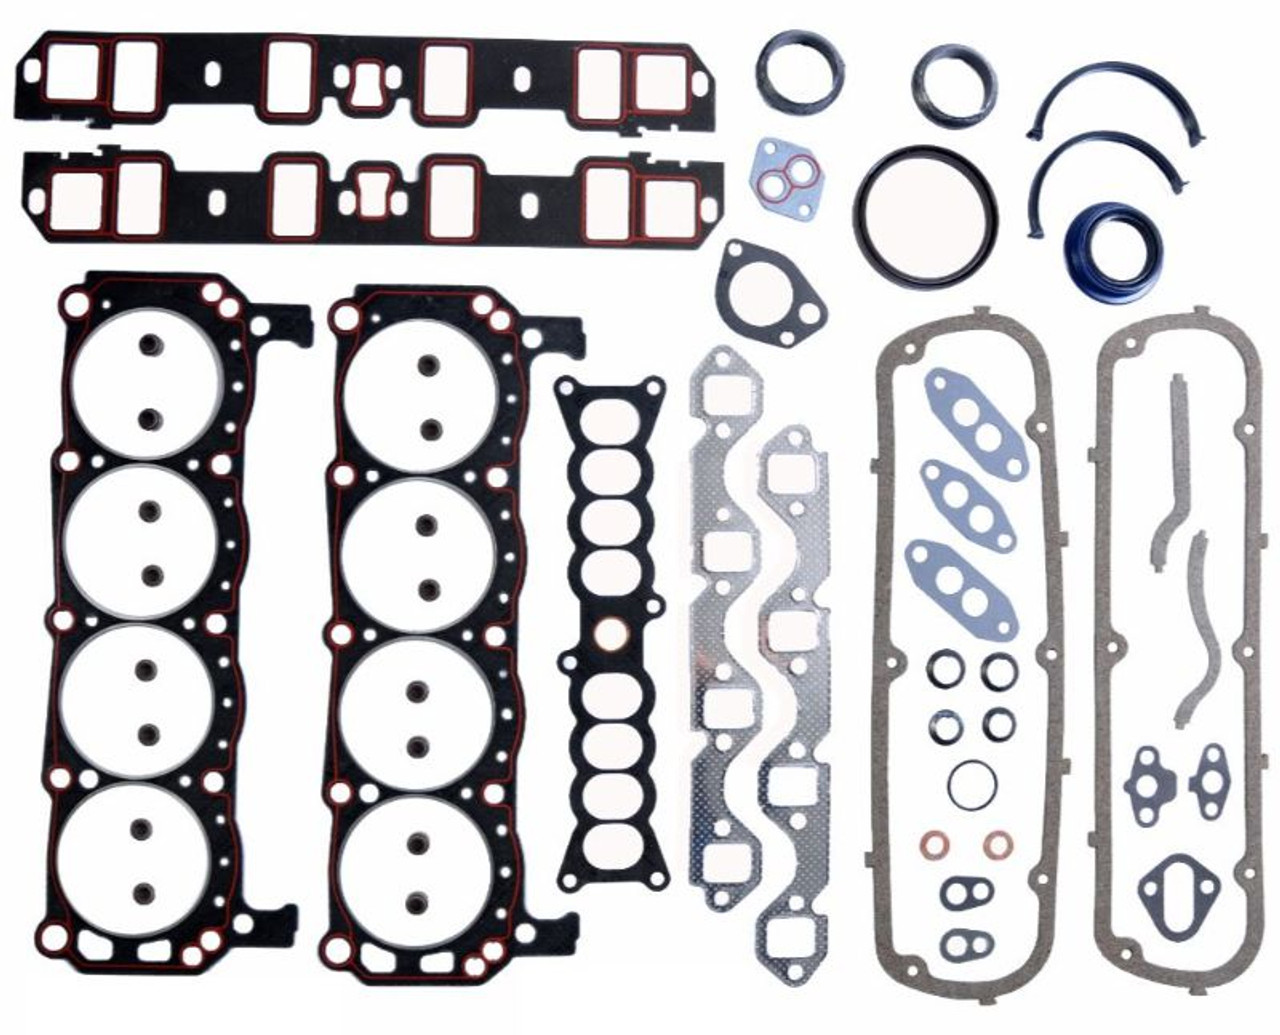 1988 Ford Country Squire 5.0L Engine Gasket Set F302L-27 -43